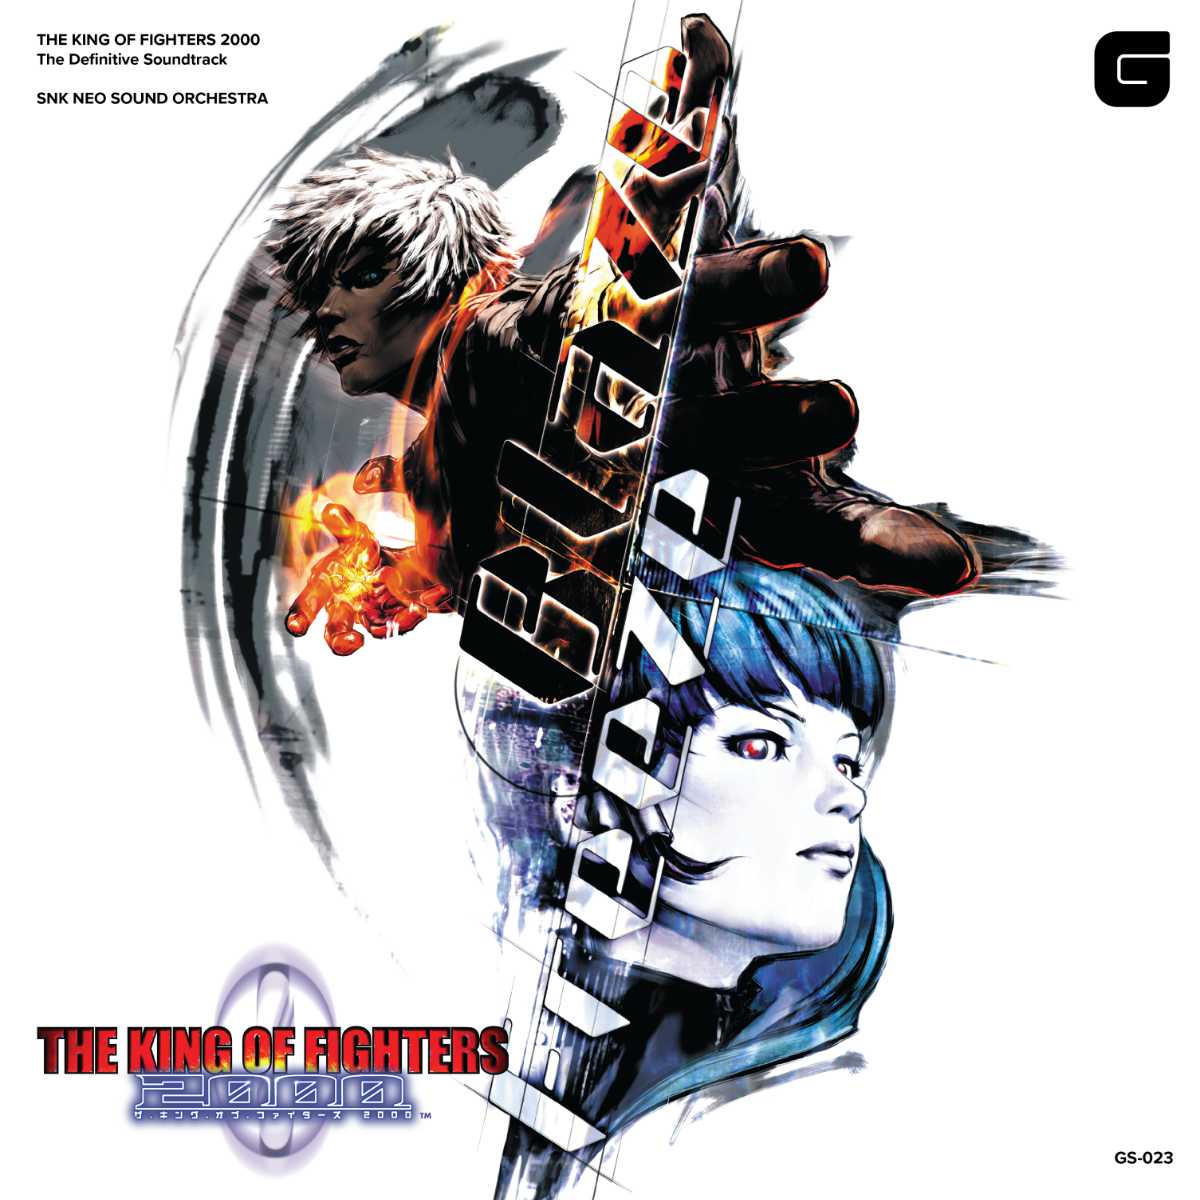 The King of Fighters 2000 - The Definitive Soundtrack - Limited